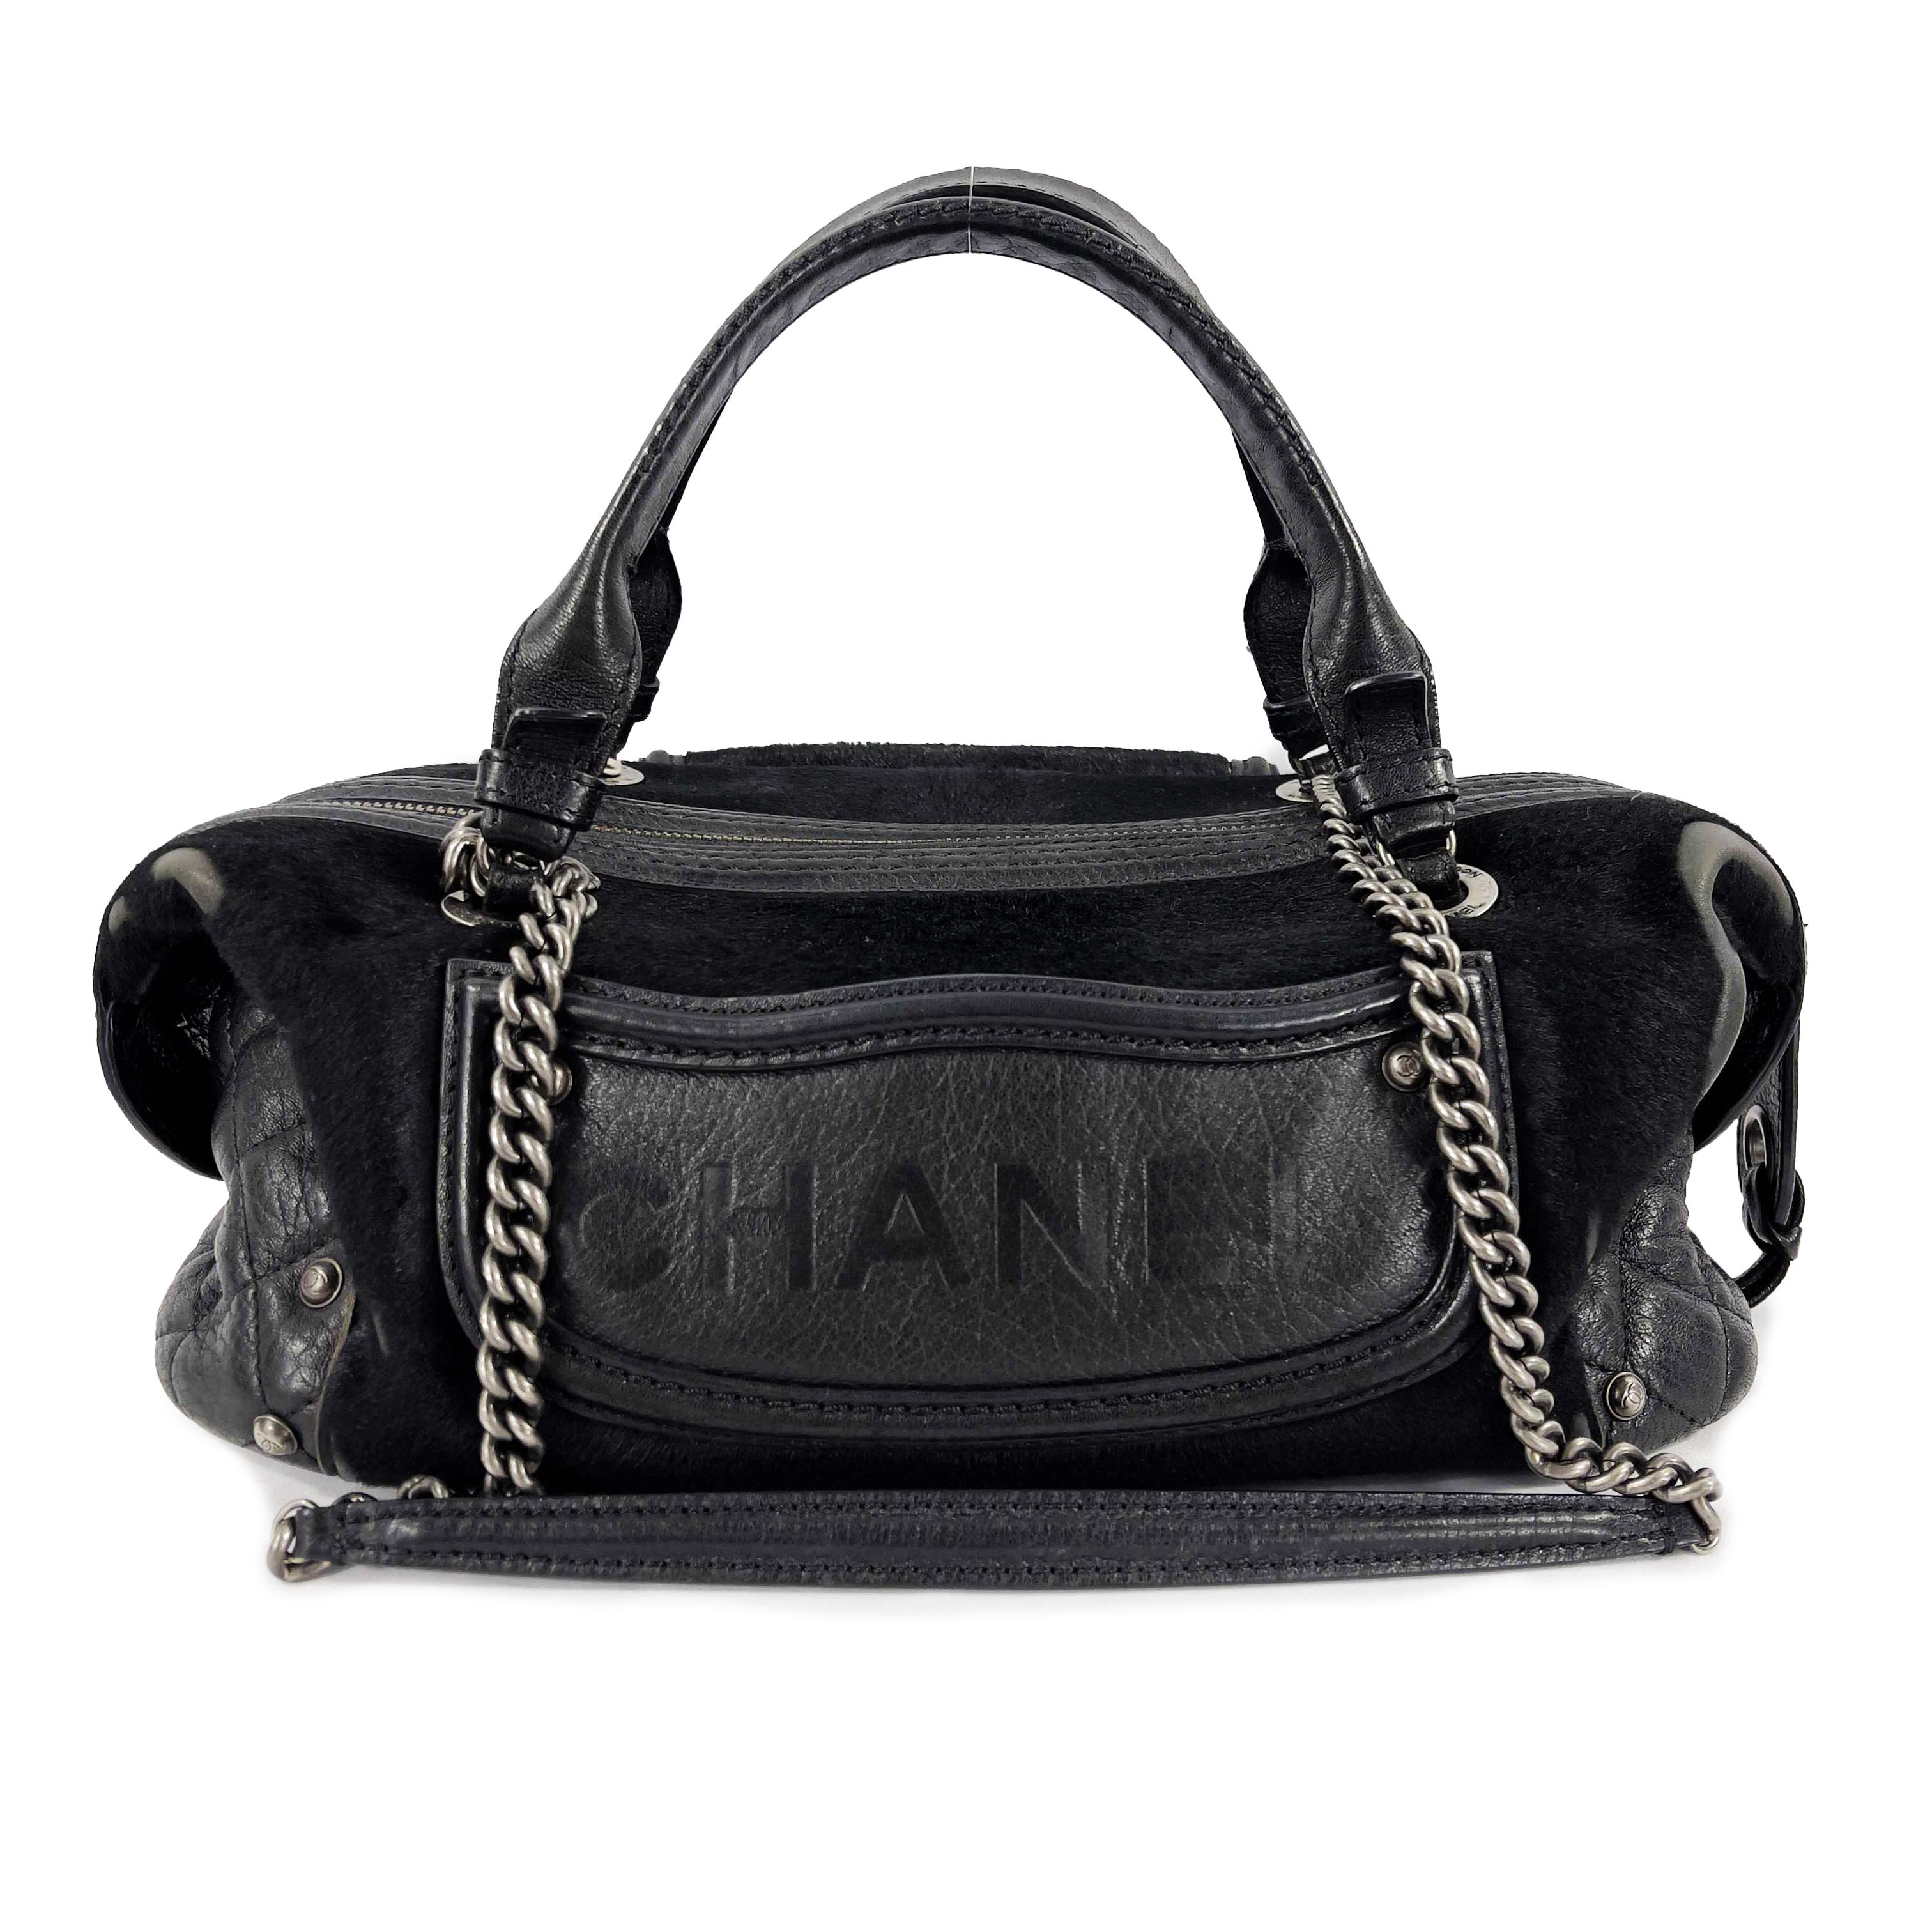 CHANEL- 14A Paris Dallas Calfskin PonyHair Fringe Bowling - Shoulder bag

Description

* Pre-Fall 2014 Collection.
* Part of Chanel's yearly 'Metier D'Art' routine, meaning literally 'Art'. The inspiration is drawn from the city Dallas and Mixed